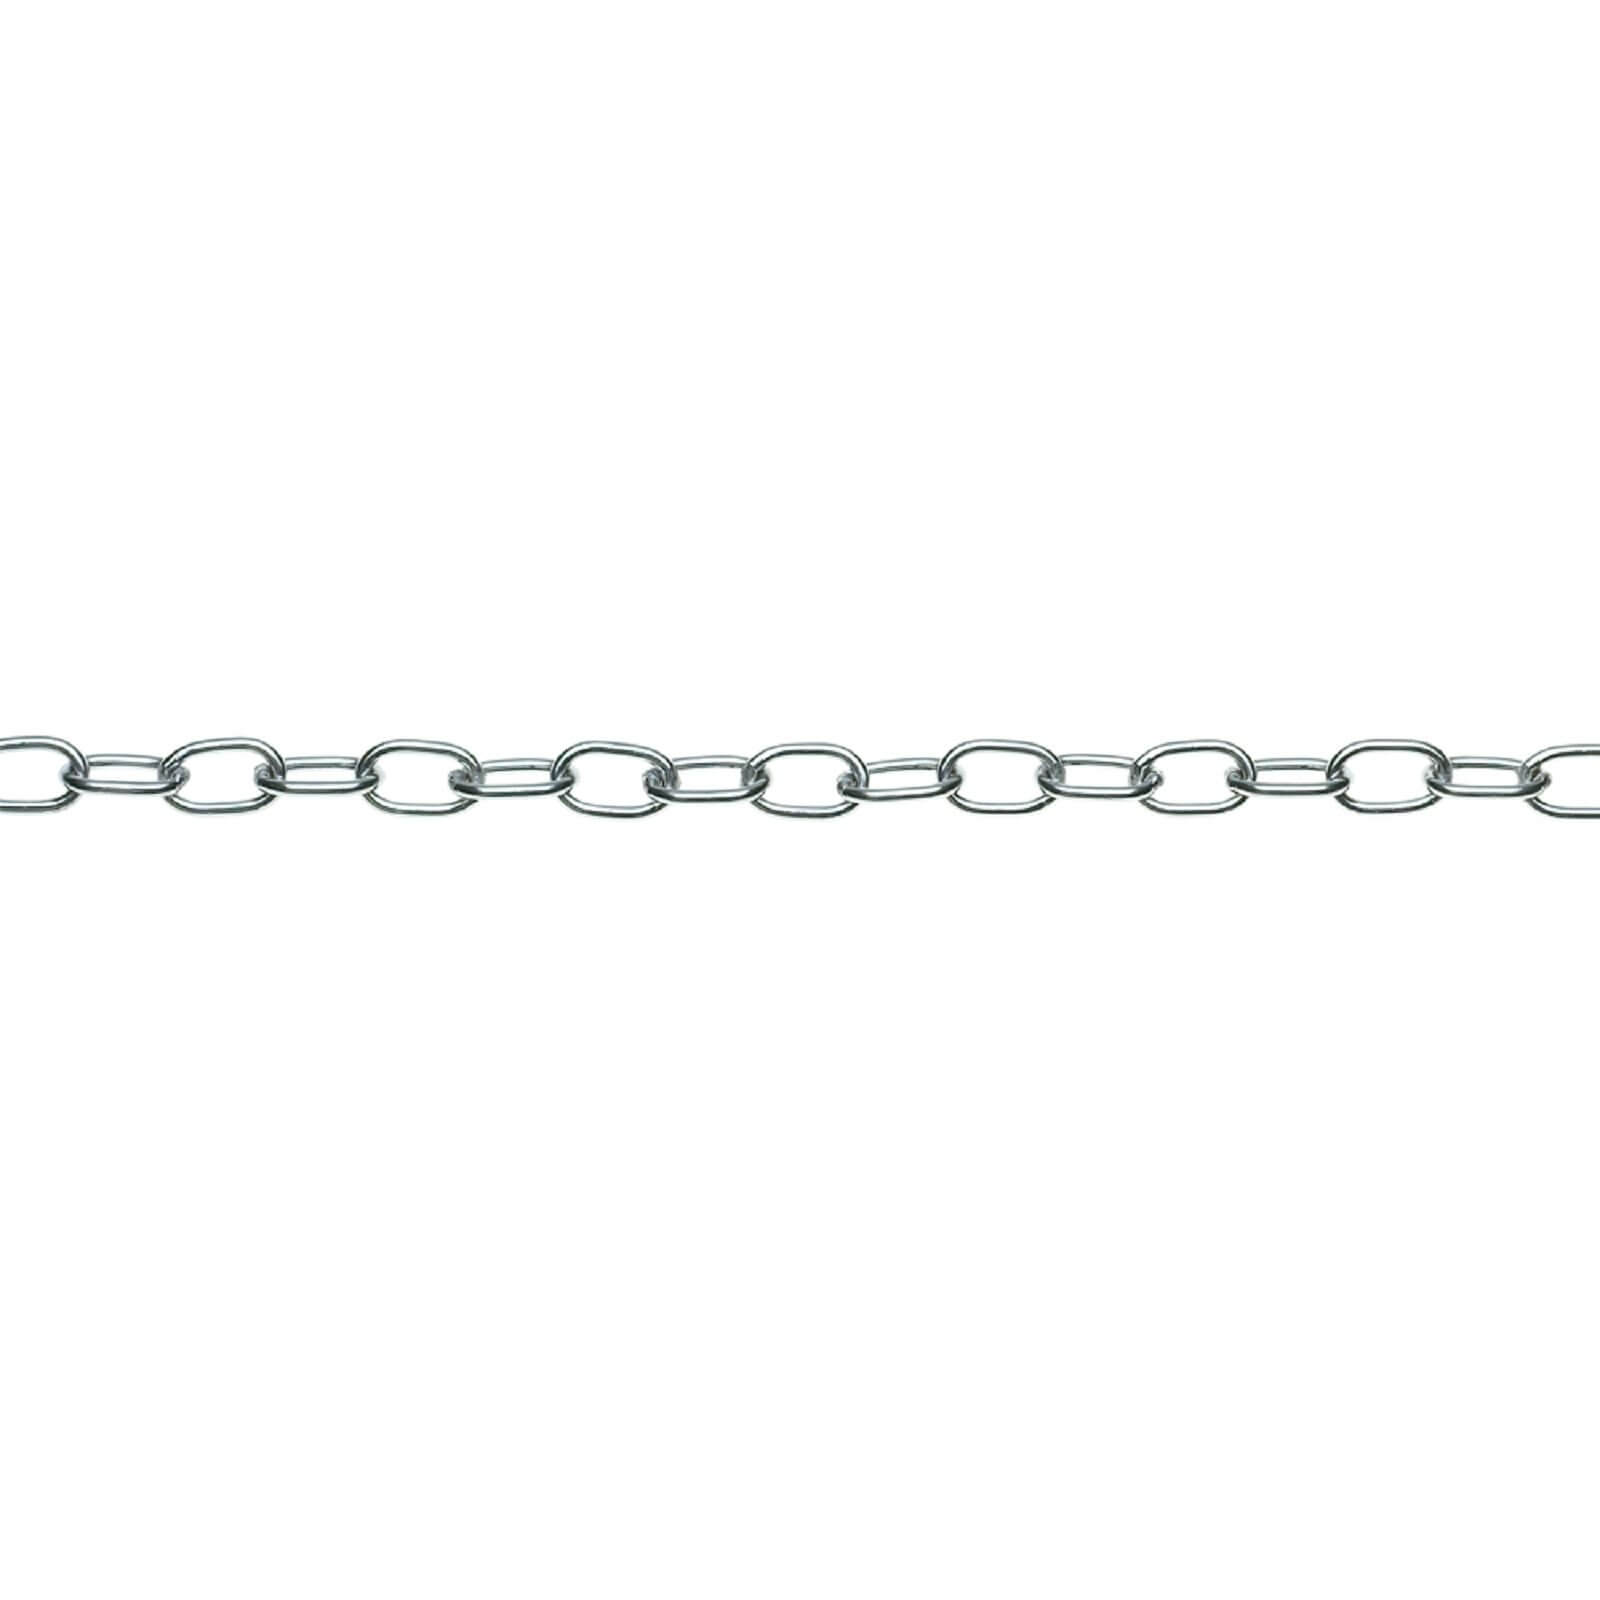 Brazed Oval Chain - Chrome Plated - 1.7mm